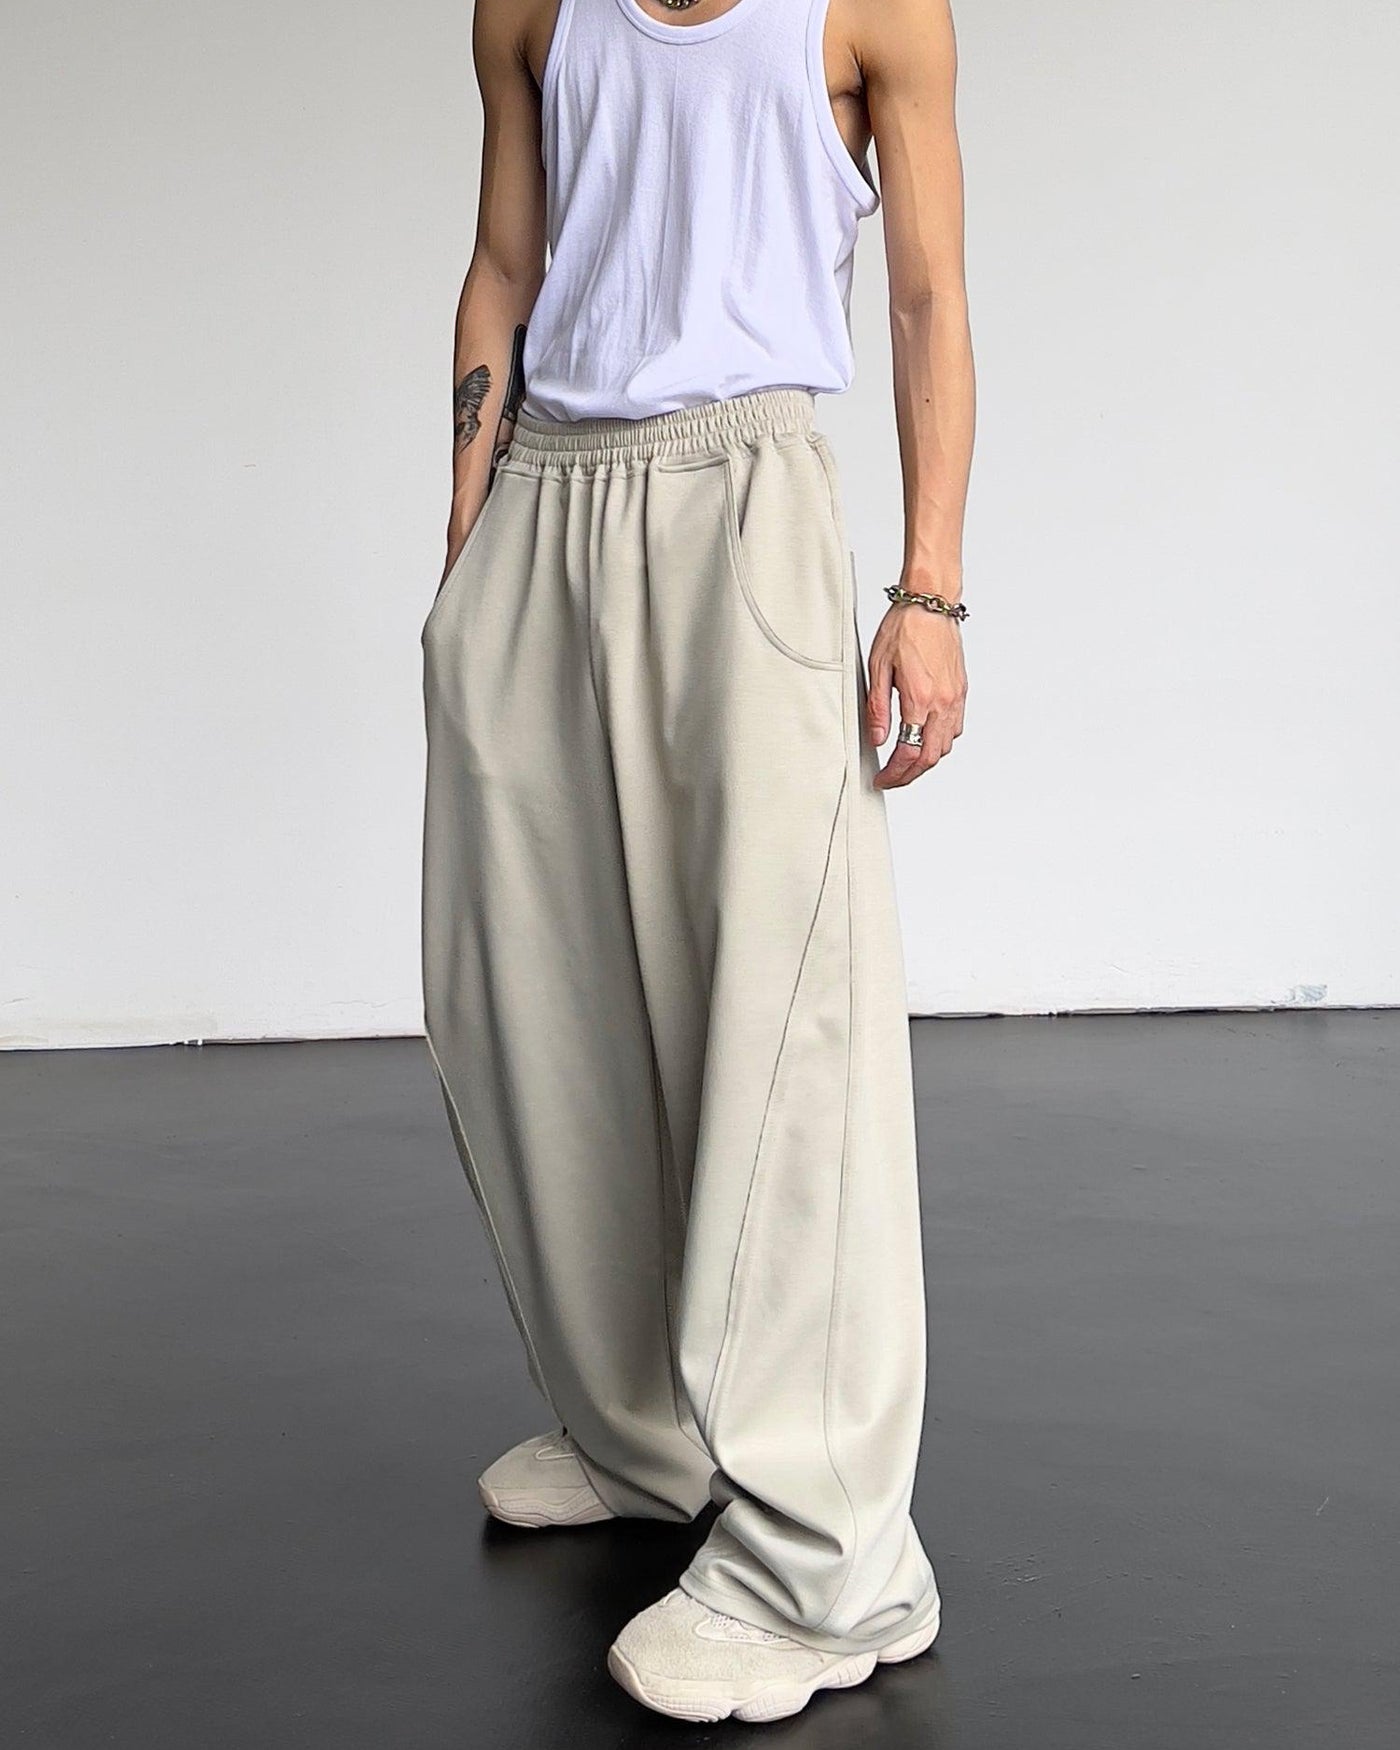 Solid Relaxed Fit High Waisted Sweatpants Korean Street Fashion Pants By MEBXX Shop Online at OH Vault